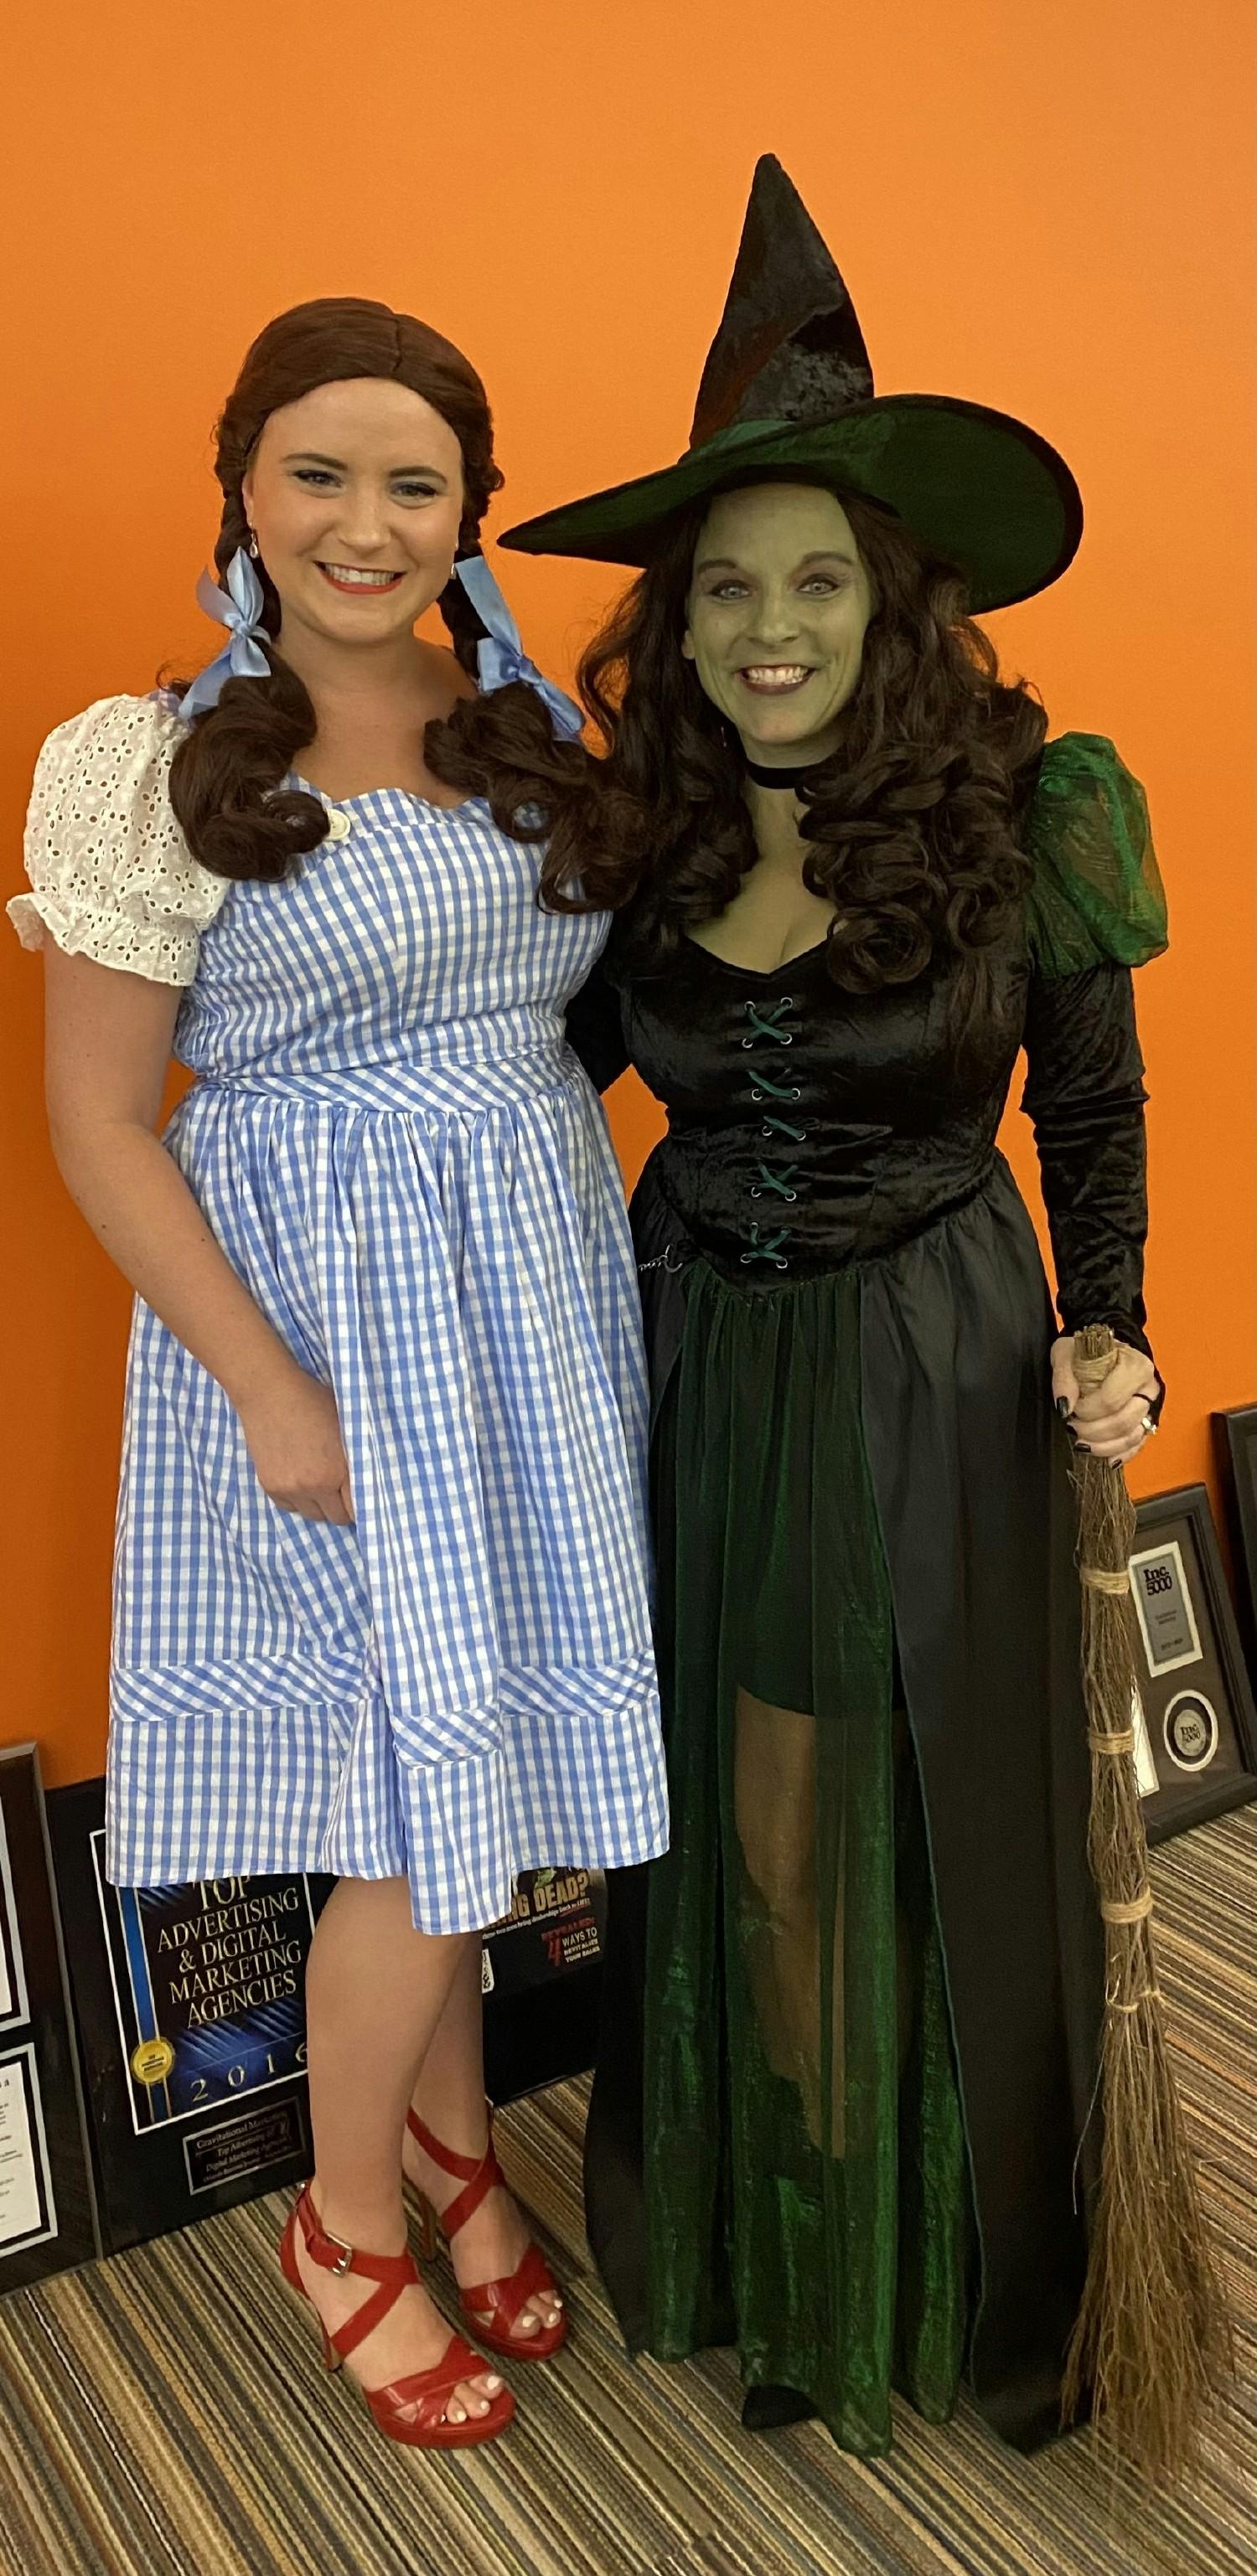 Dorothy and the Wicked Witch at the Gravitational Marketing Halloween Party!